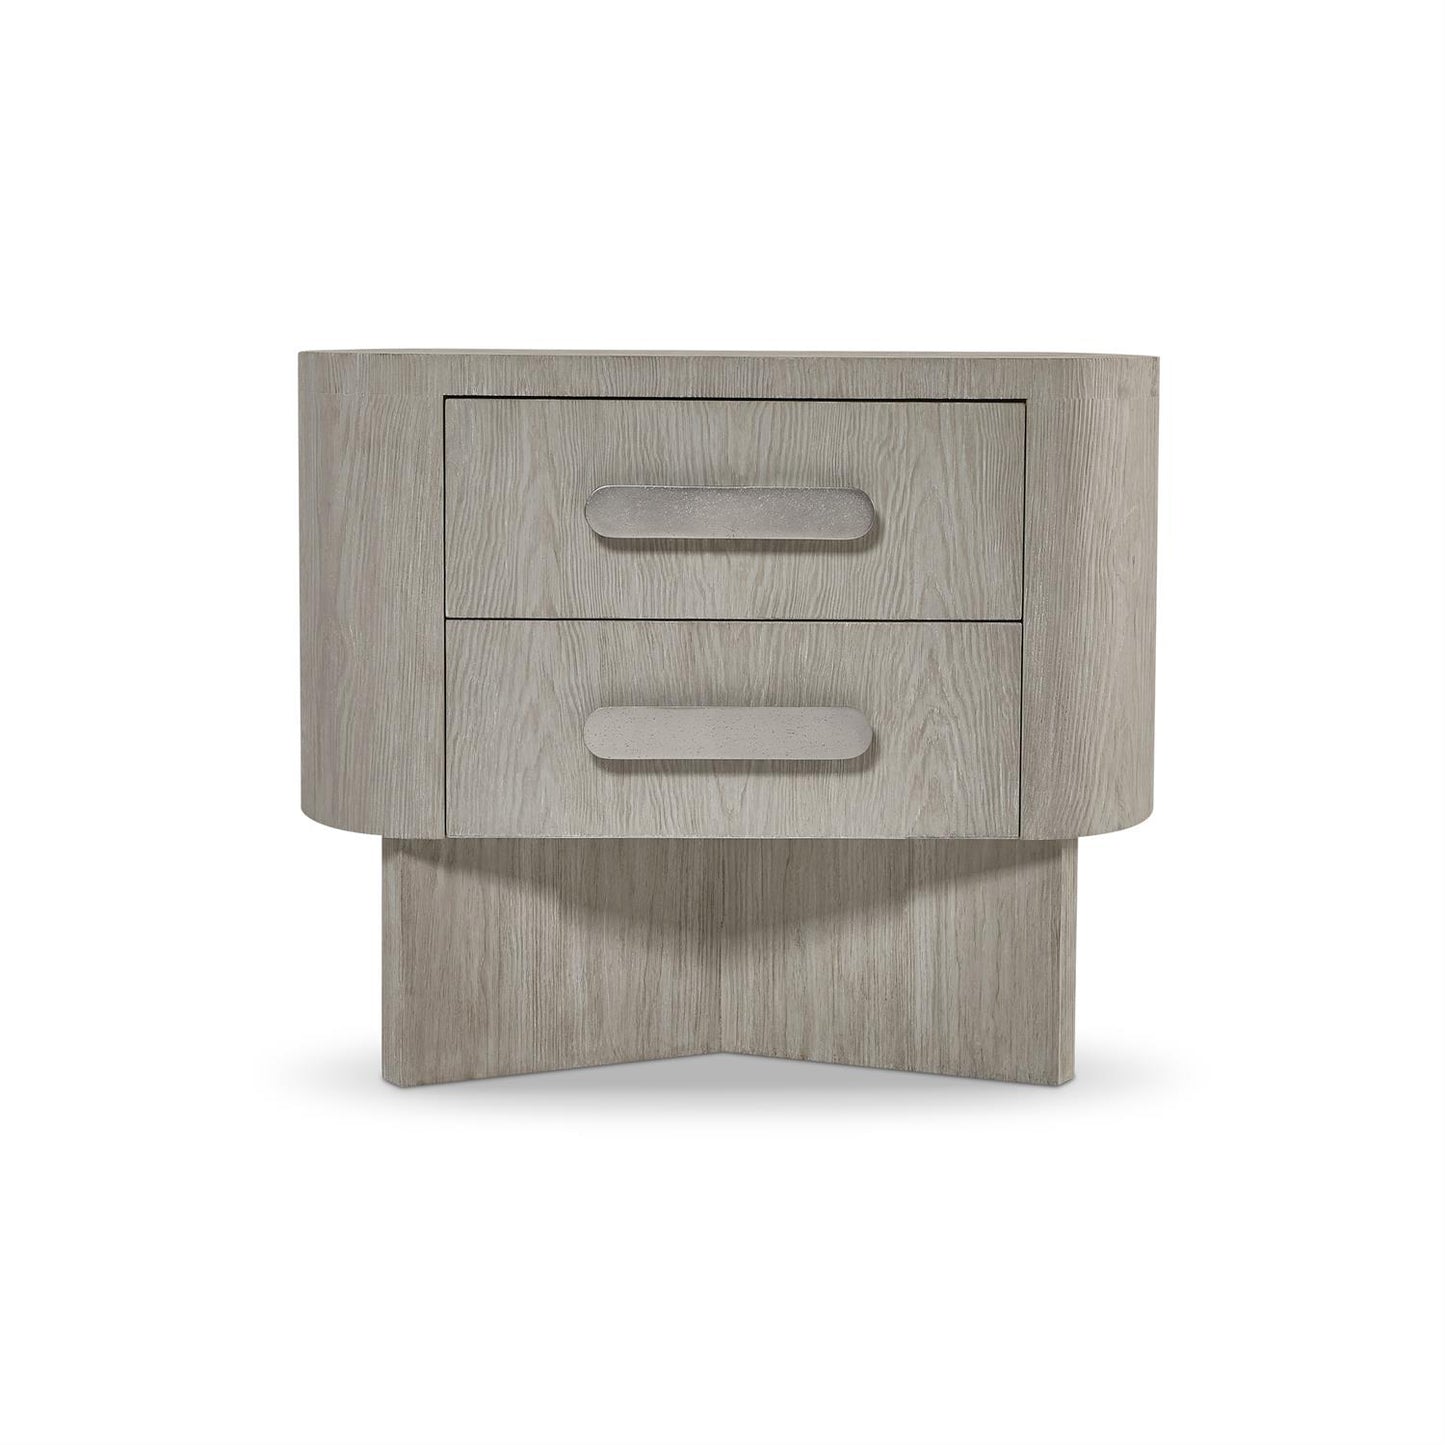 Rianon, Light, Two Drawers, Oval-shaped, Small Nightstand